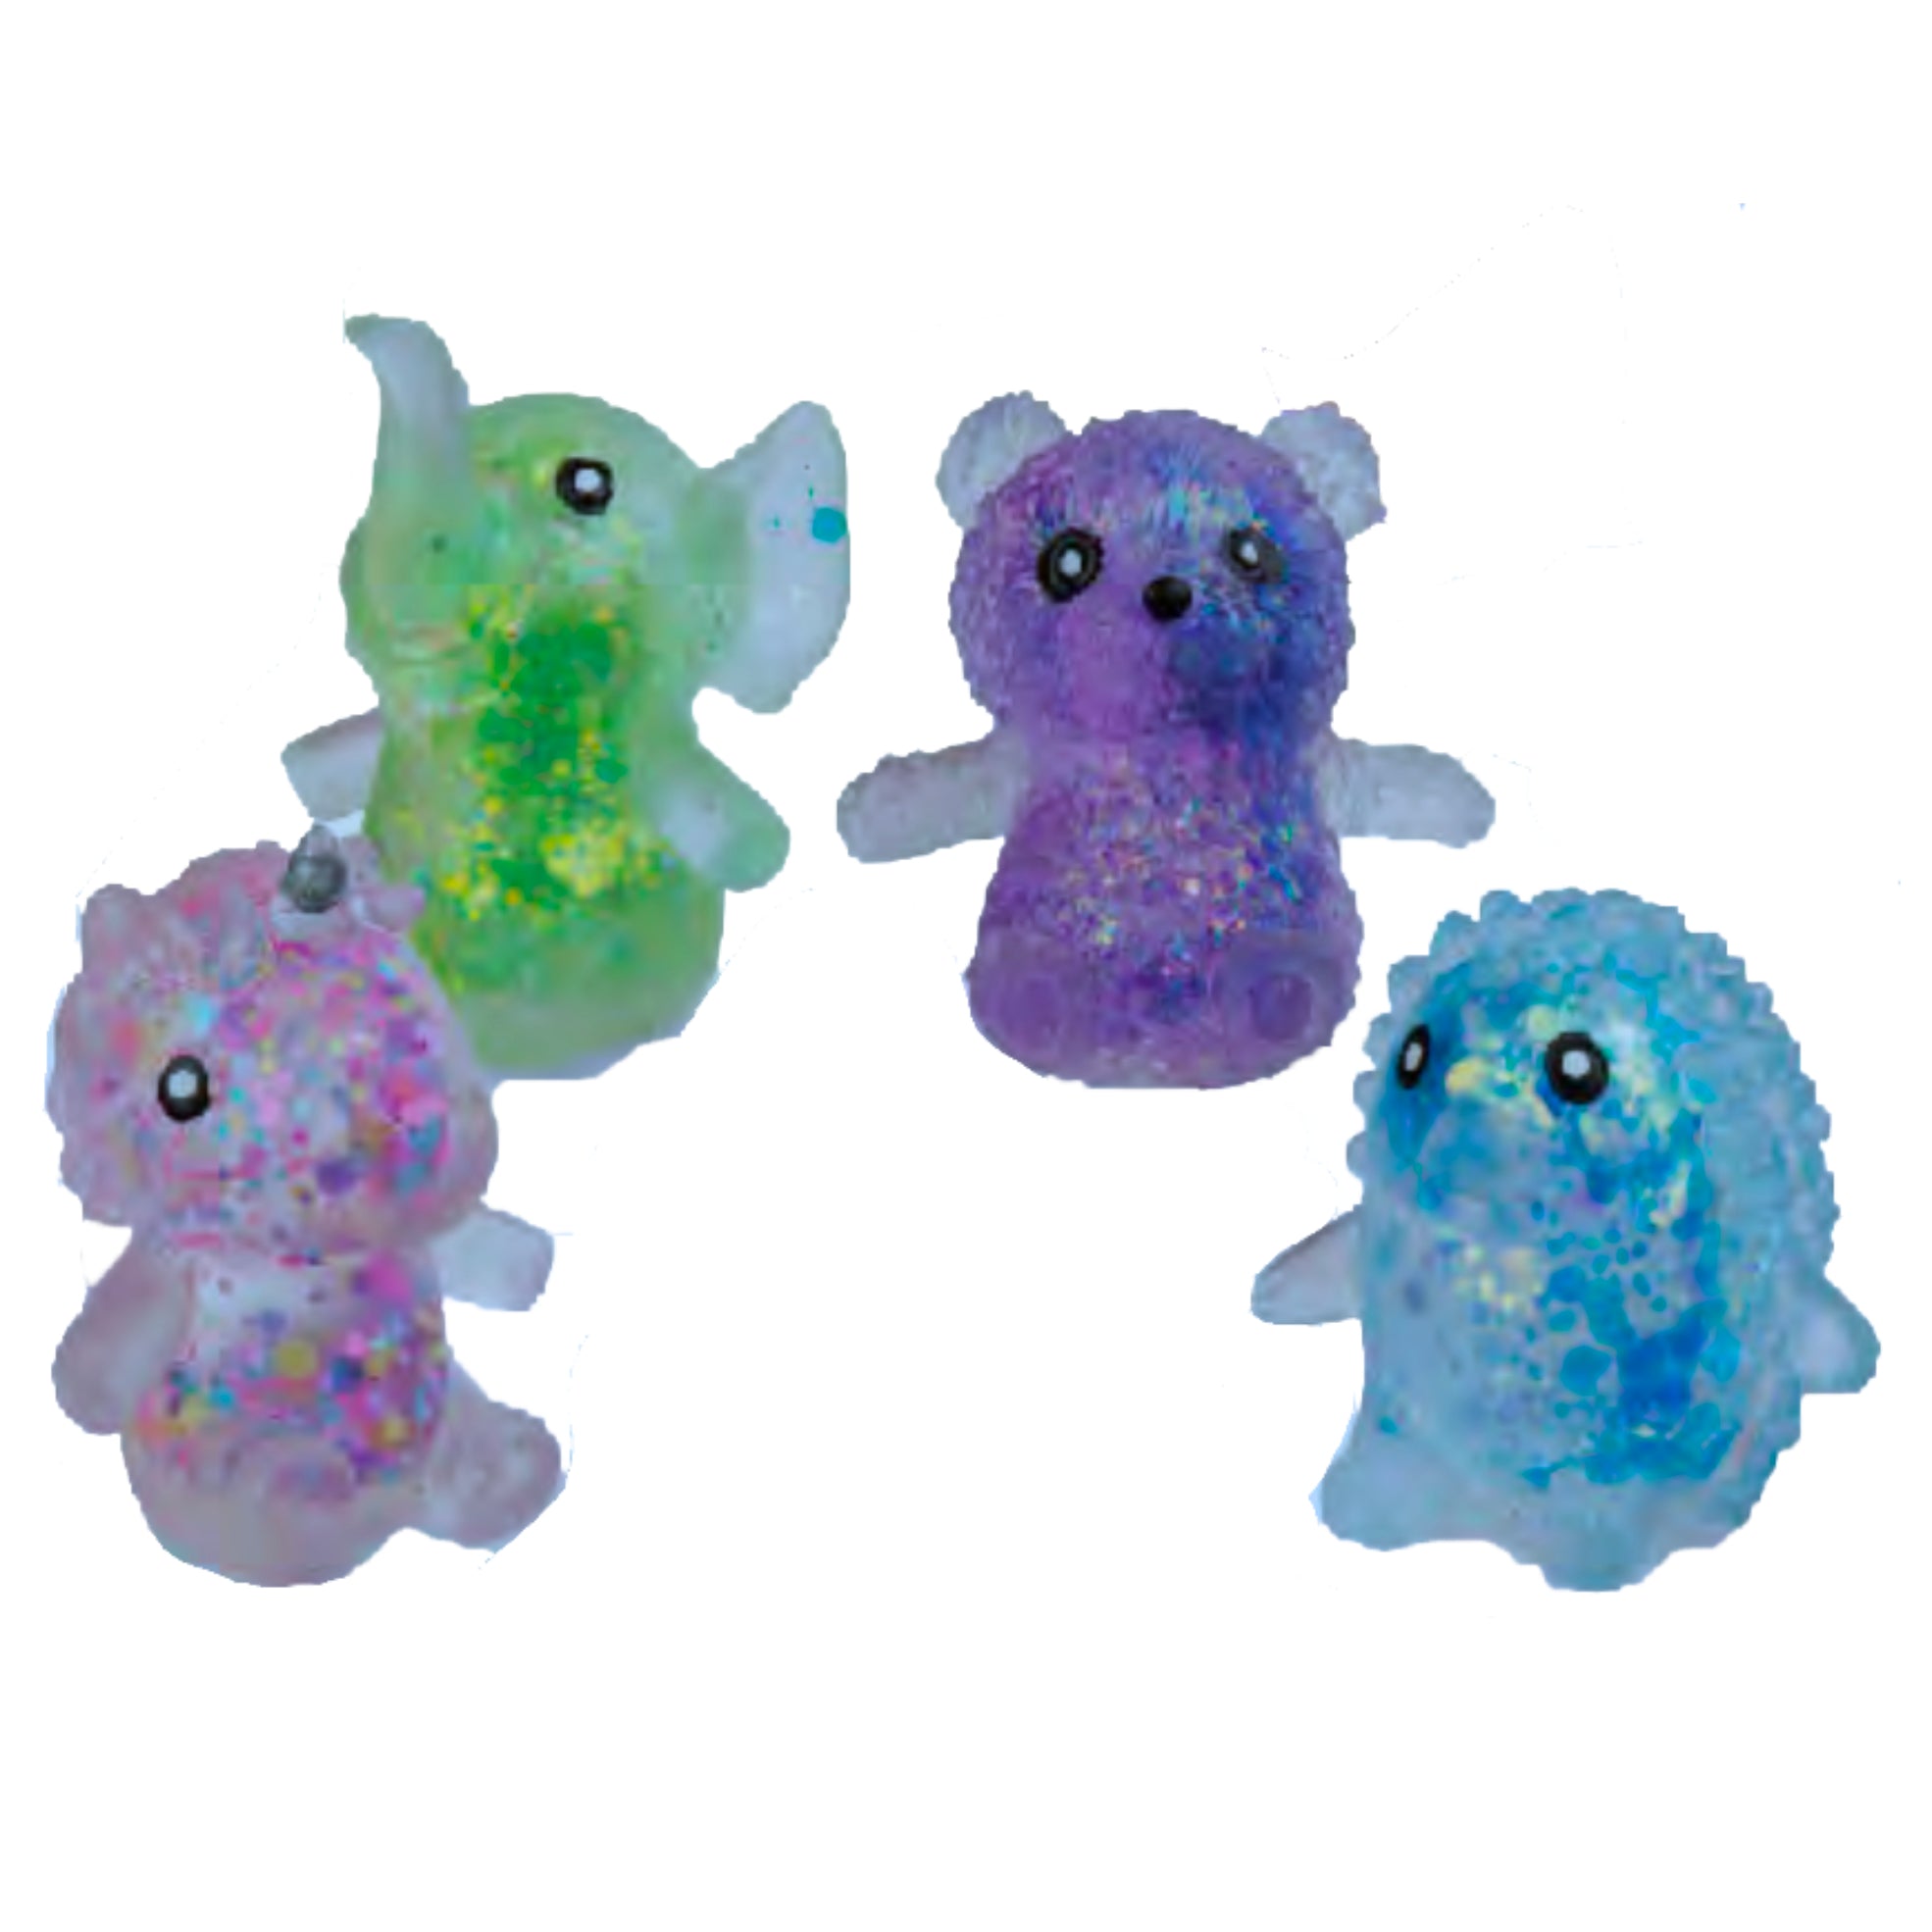 Gummiez Itty Bitty Critters Super Fun Squish Toy – Assorted Colors - Sold Individually